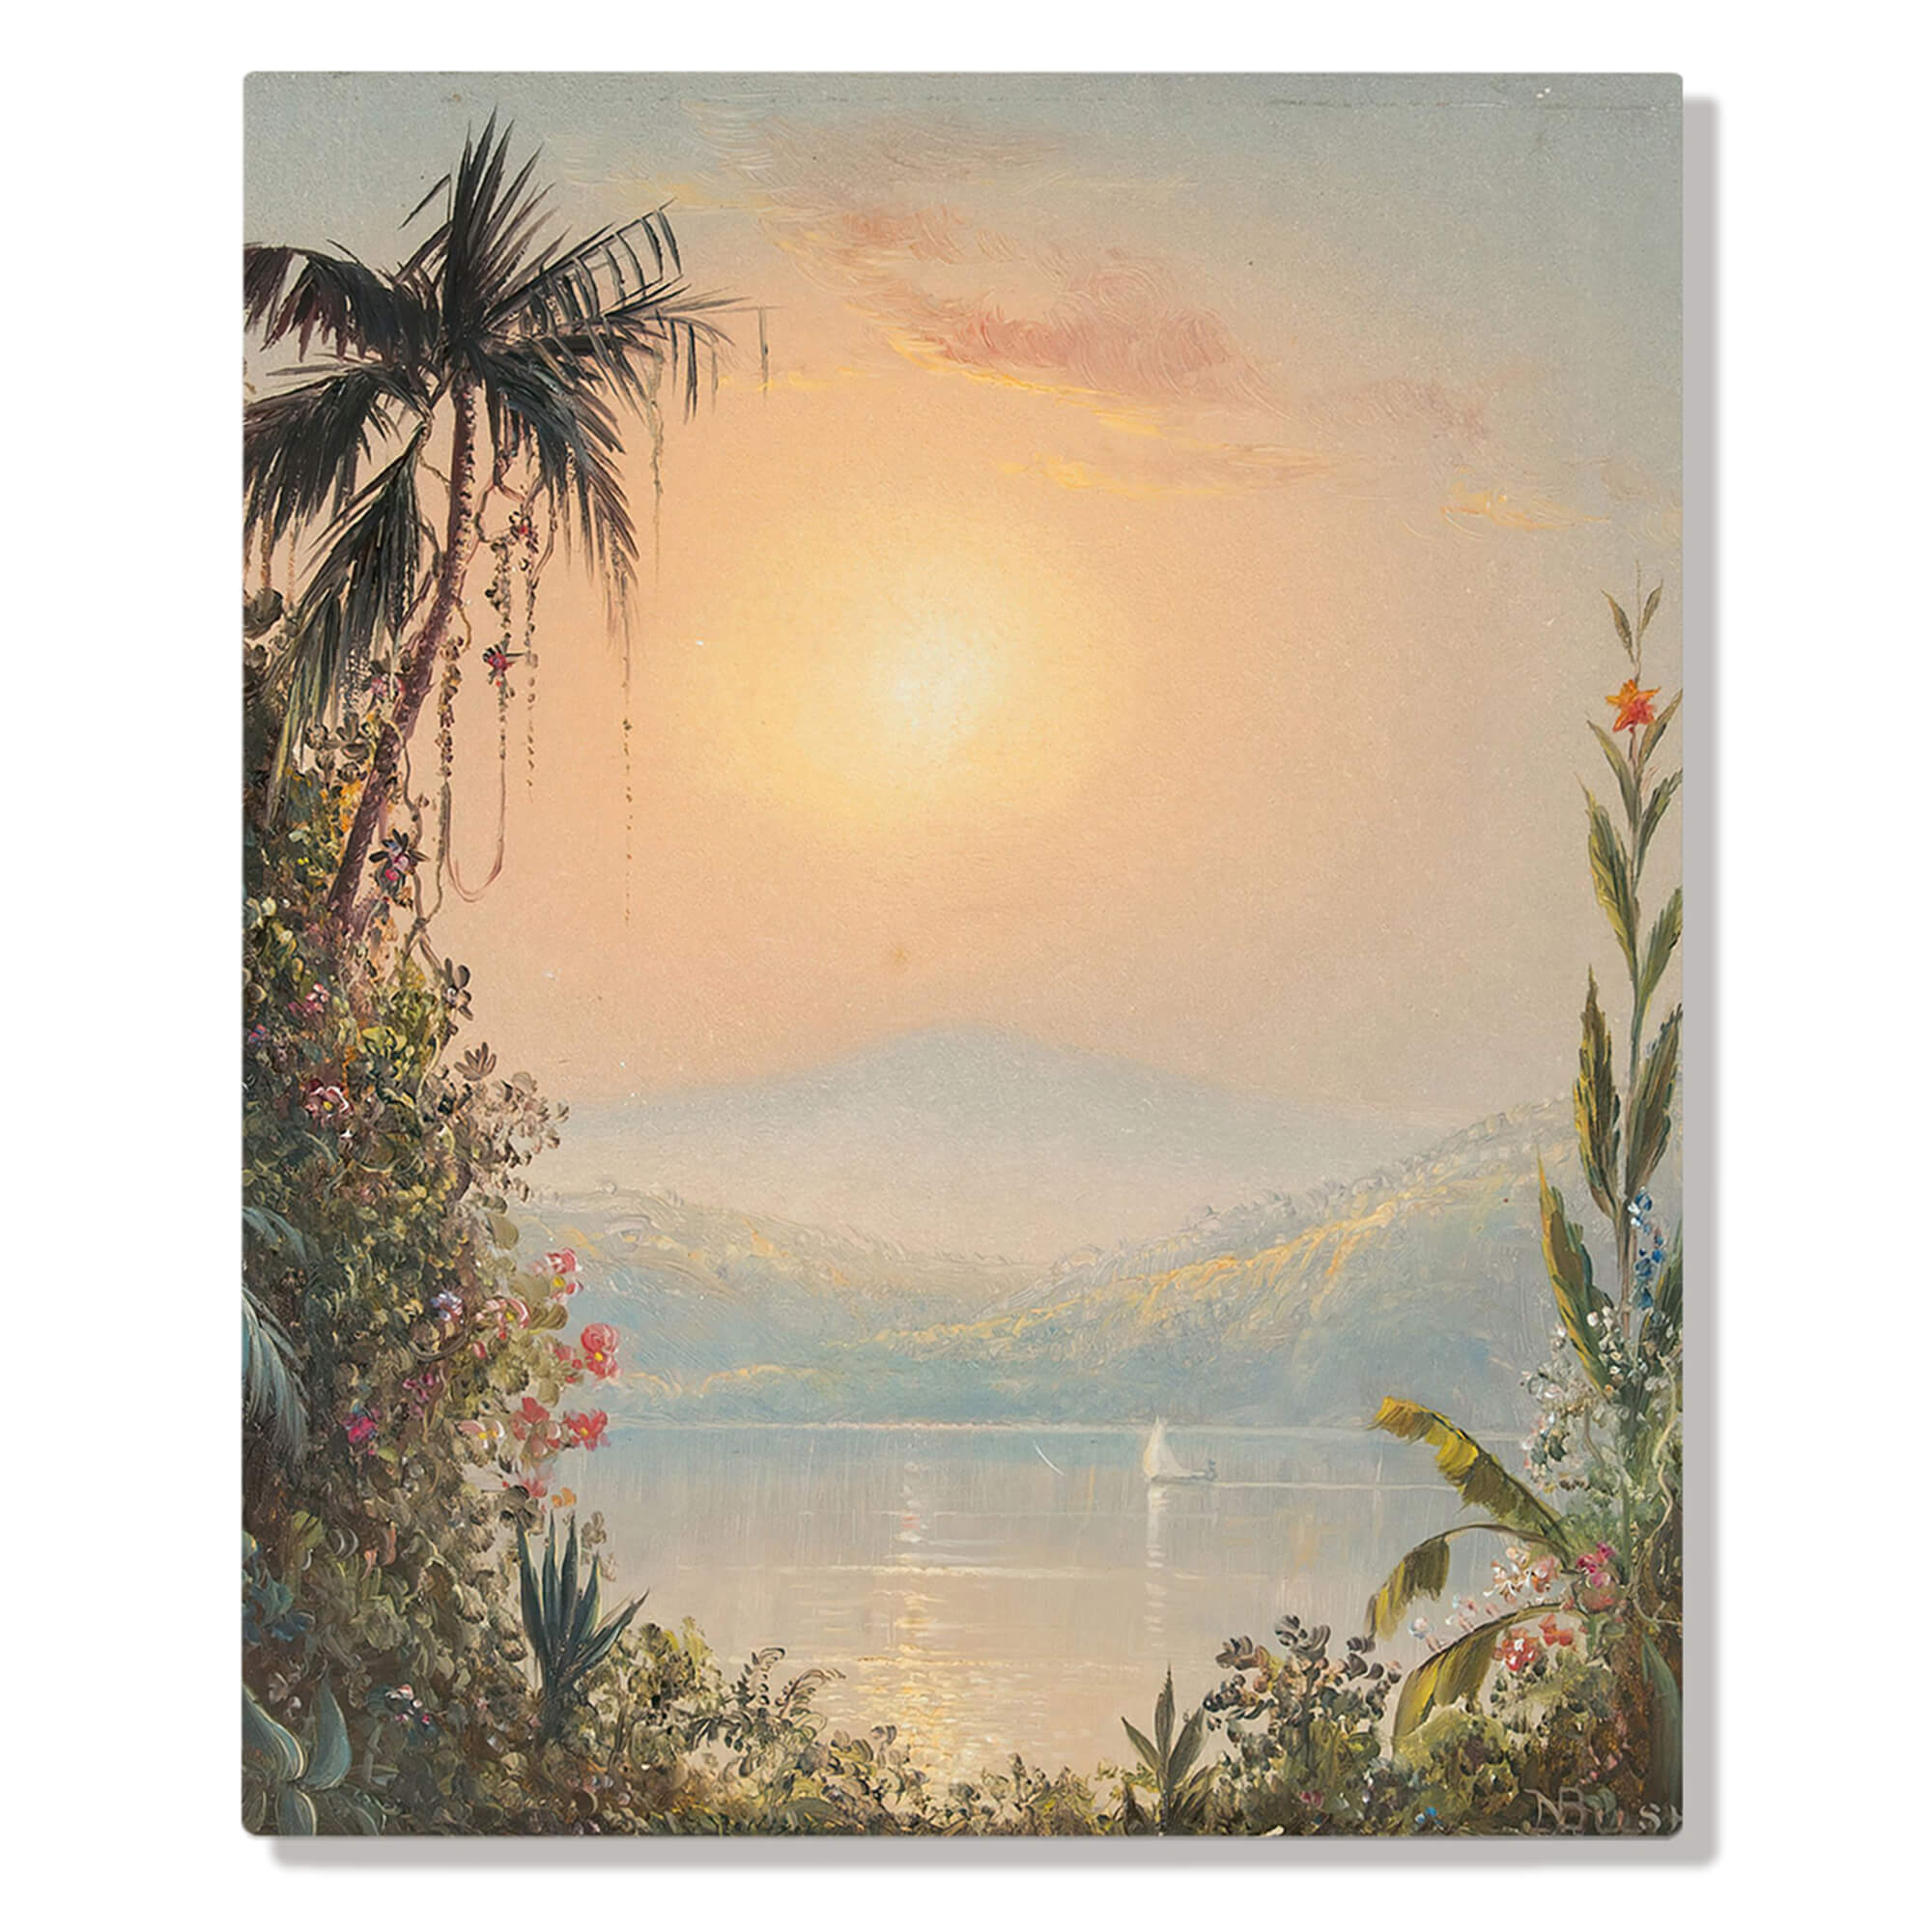 A vintage artwork featuring a serene tropical scenery framed by some plants and colorful flowers